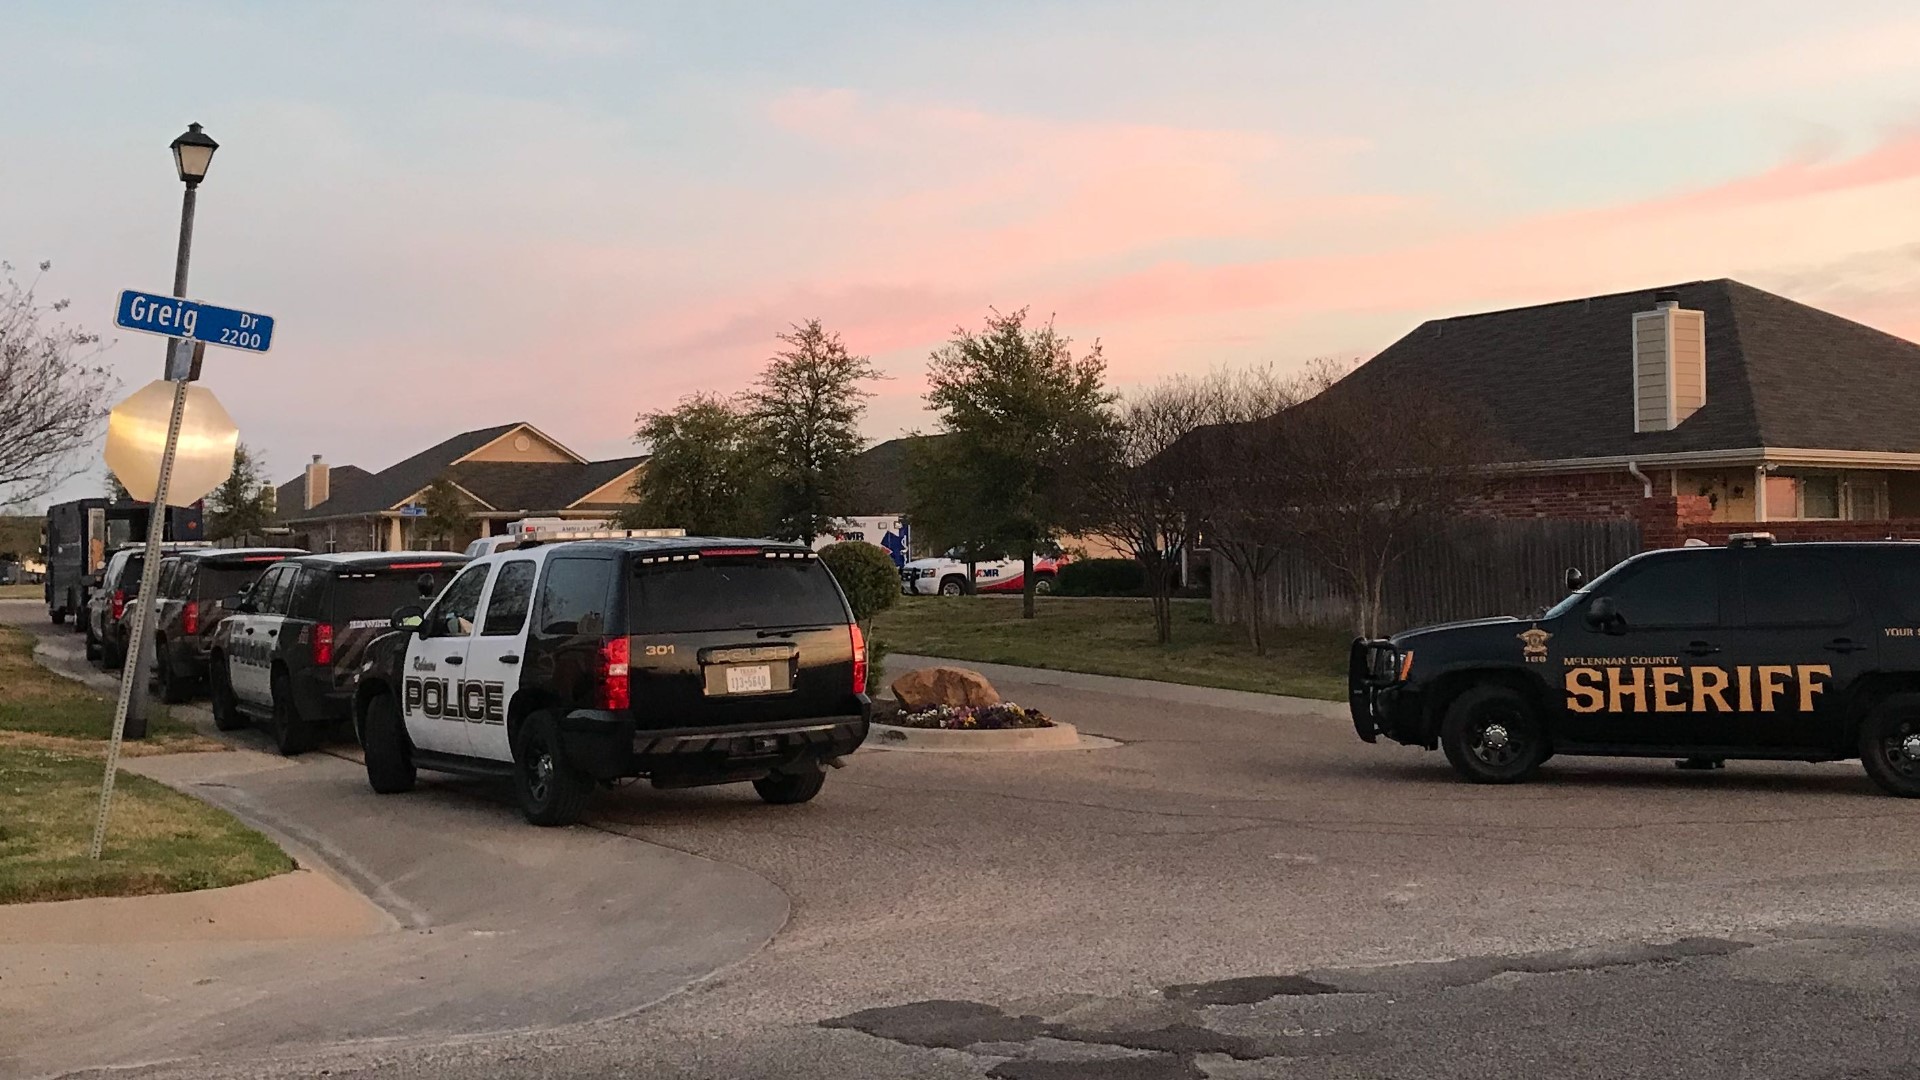 A nearly eight-hour standoff in Robinson ended Wednesday morning when a 29-year-old man reportedly shot and killed himself in his home.